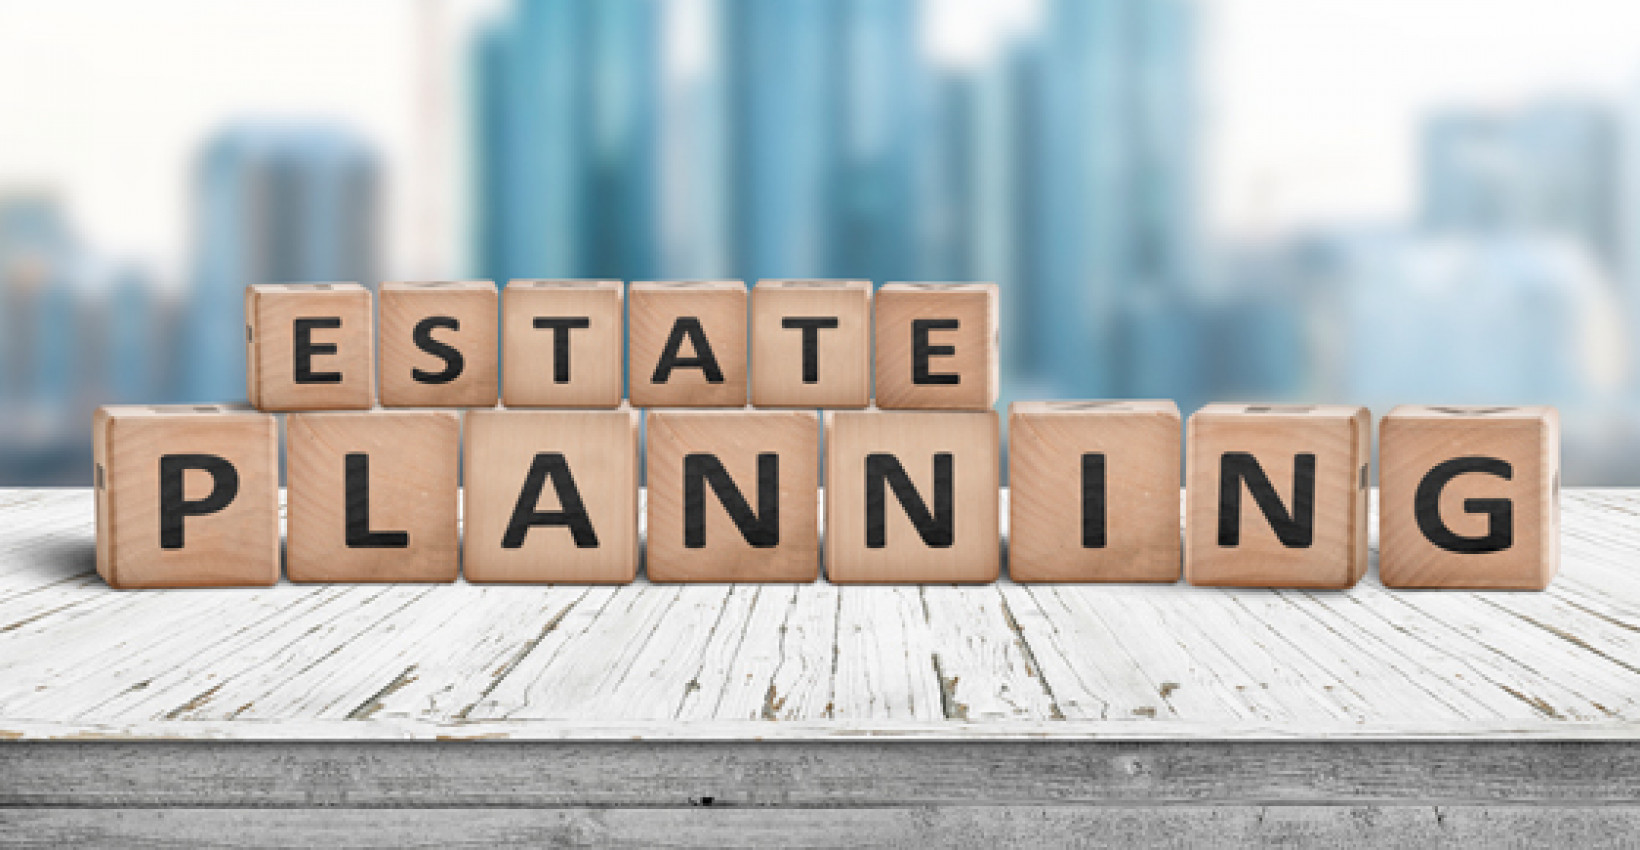 Estate Planning spelled out with scrabble tiles